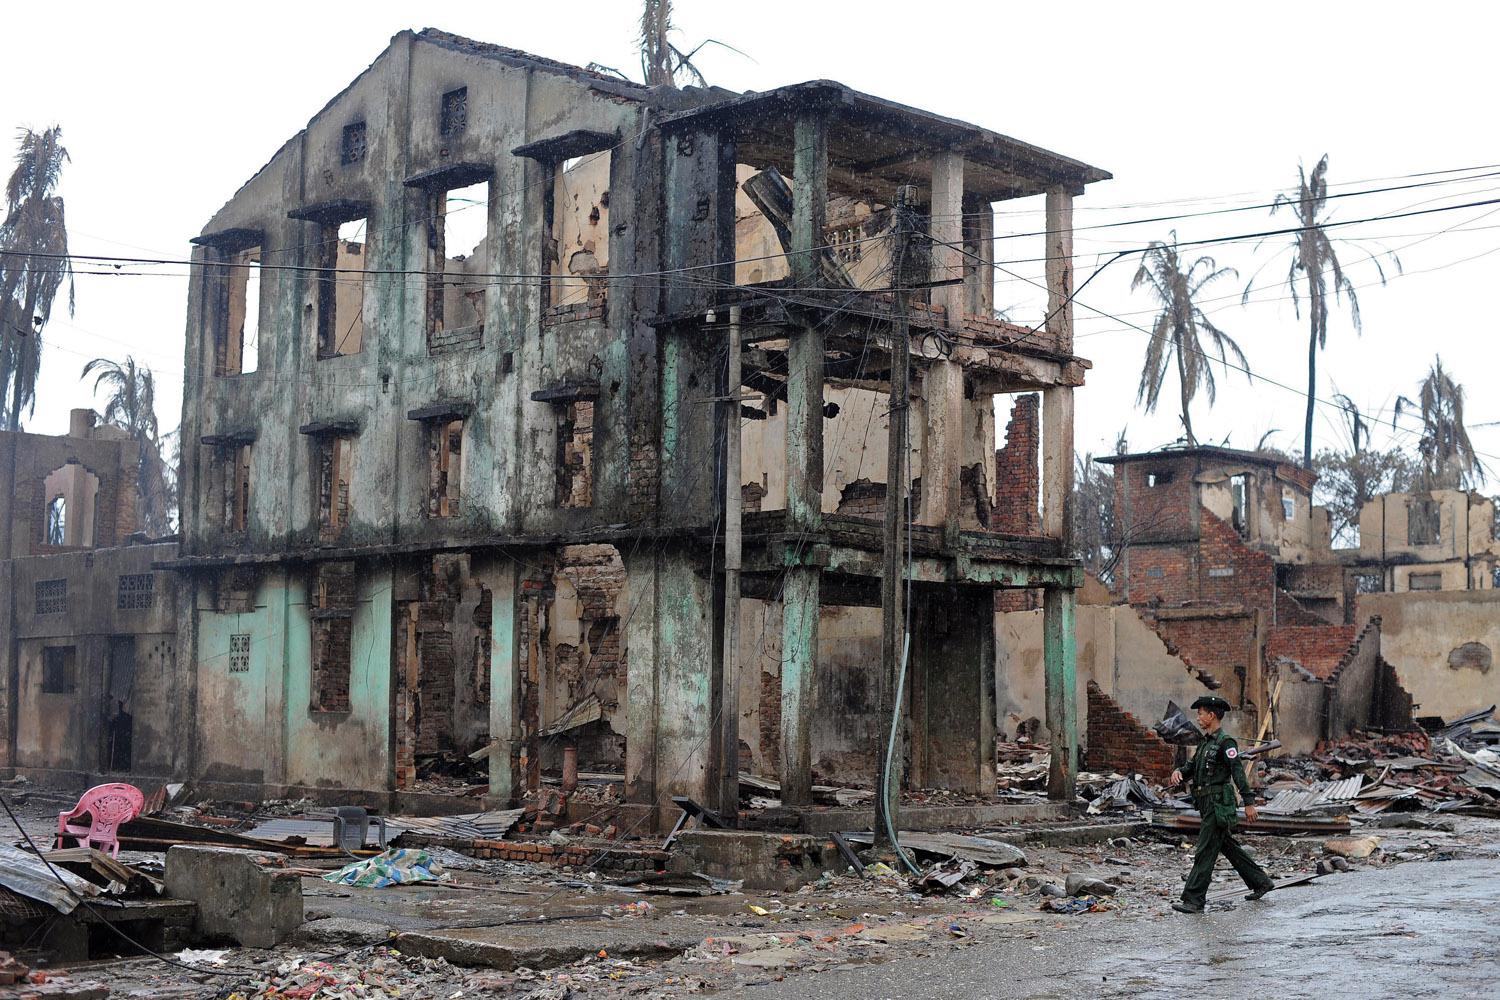 A Burmese soldier walks past a partially destroyed building in Sittwe, capital of Arakan State in western Burma, on June 14, 2012.